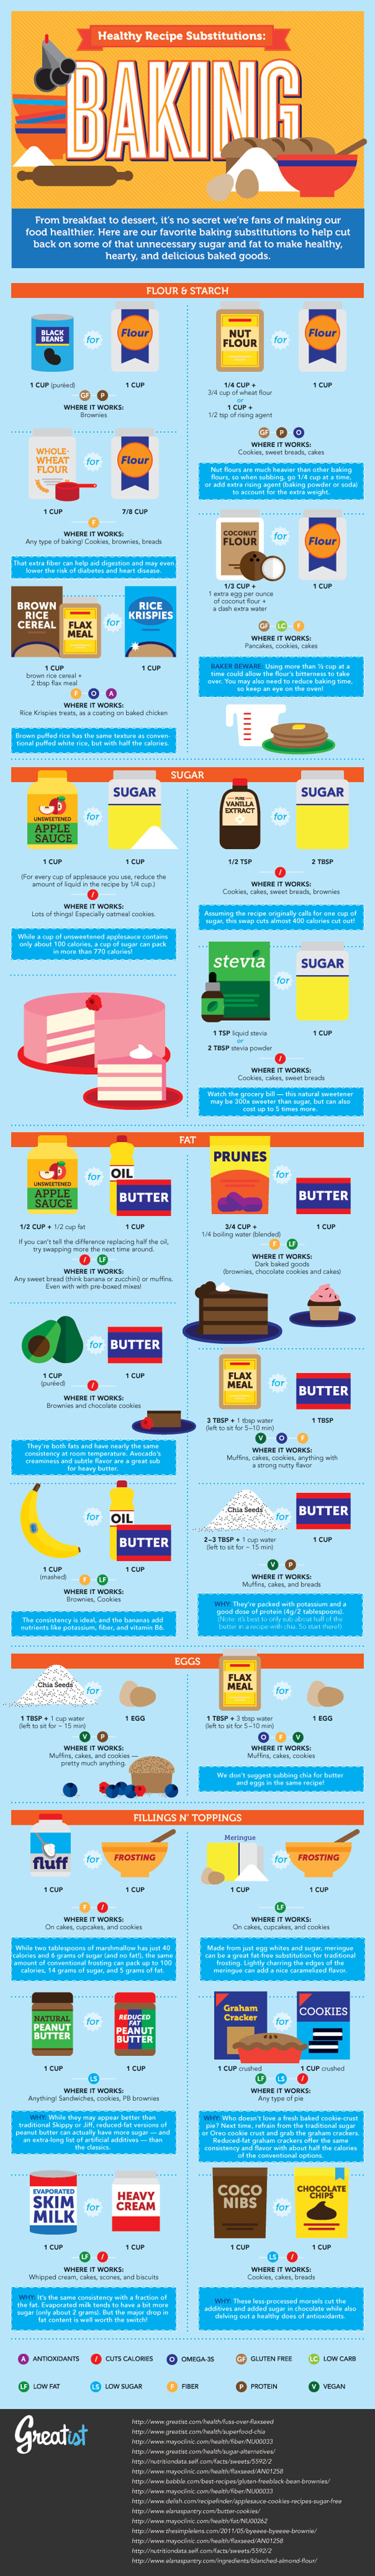 Healthy Baking Recipe Substitutions